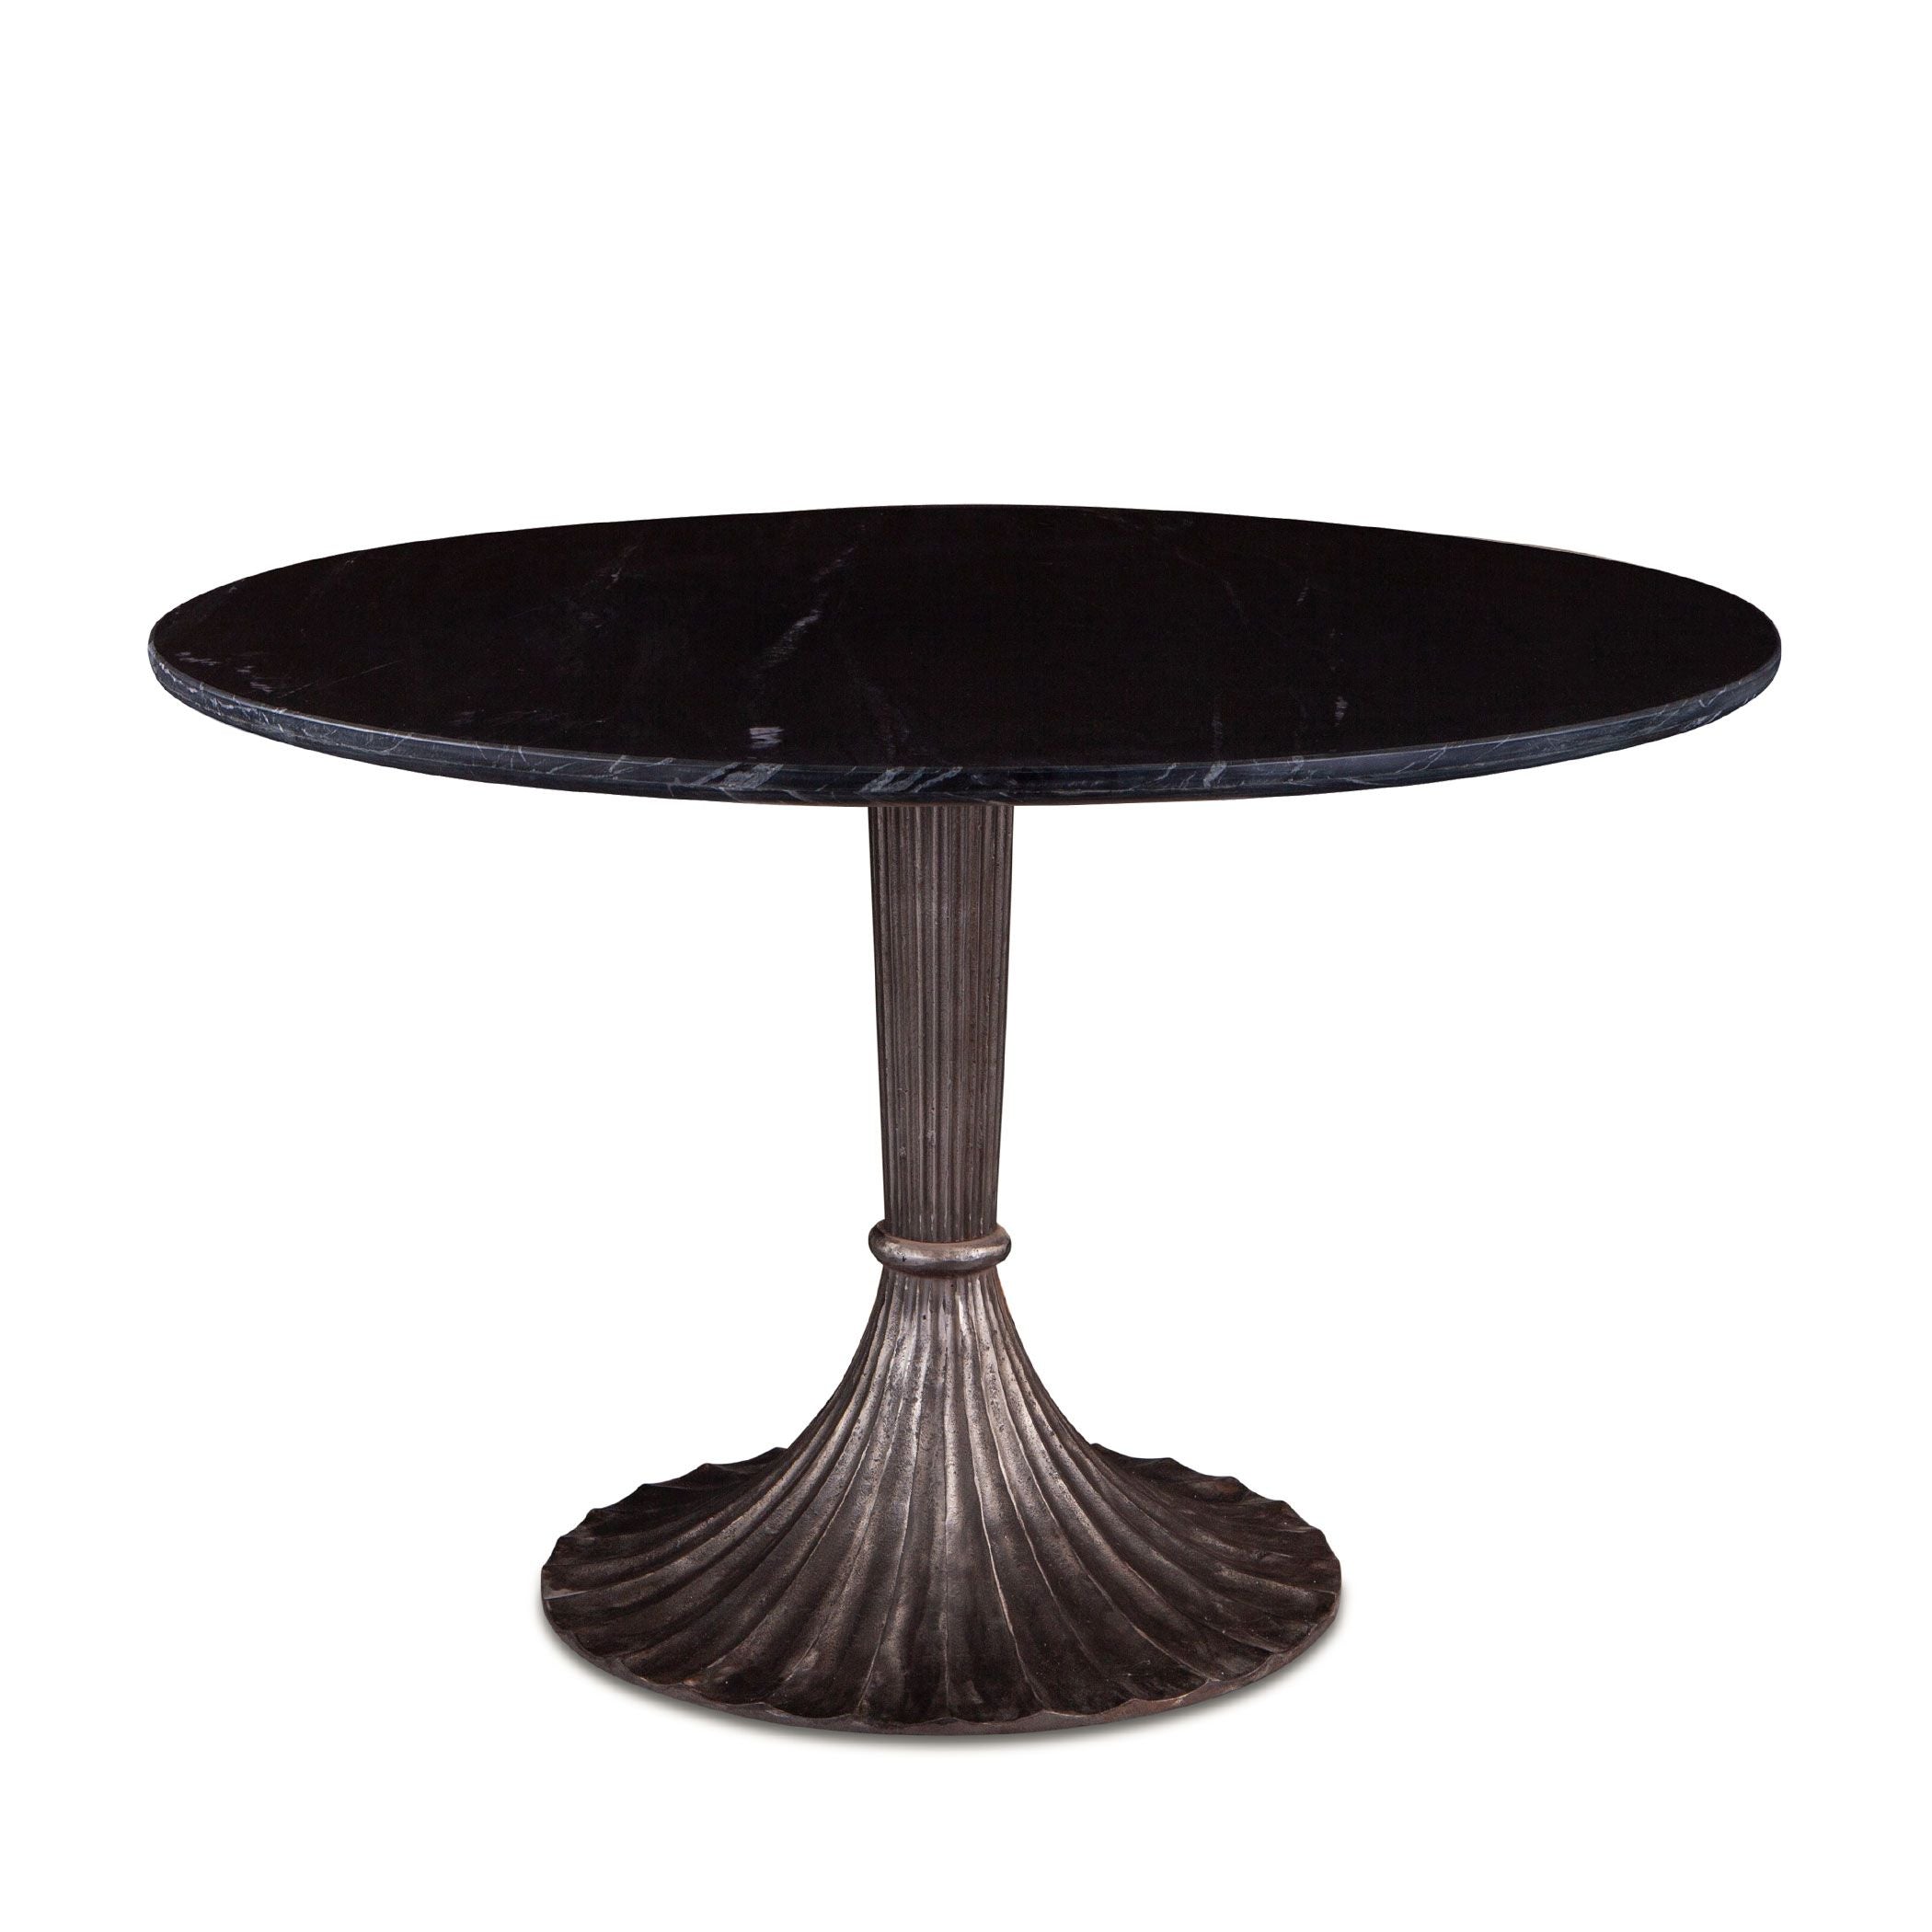 Parisian Bistro Black Marble Top Dining Table